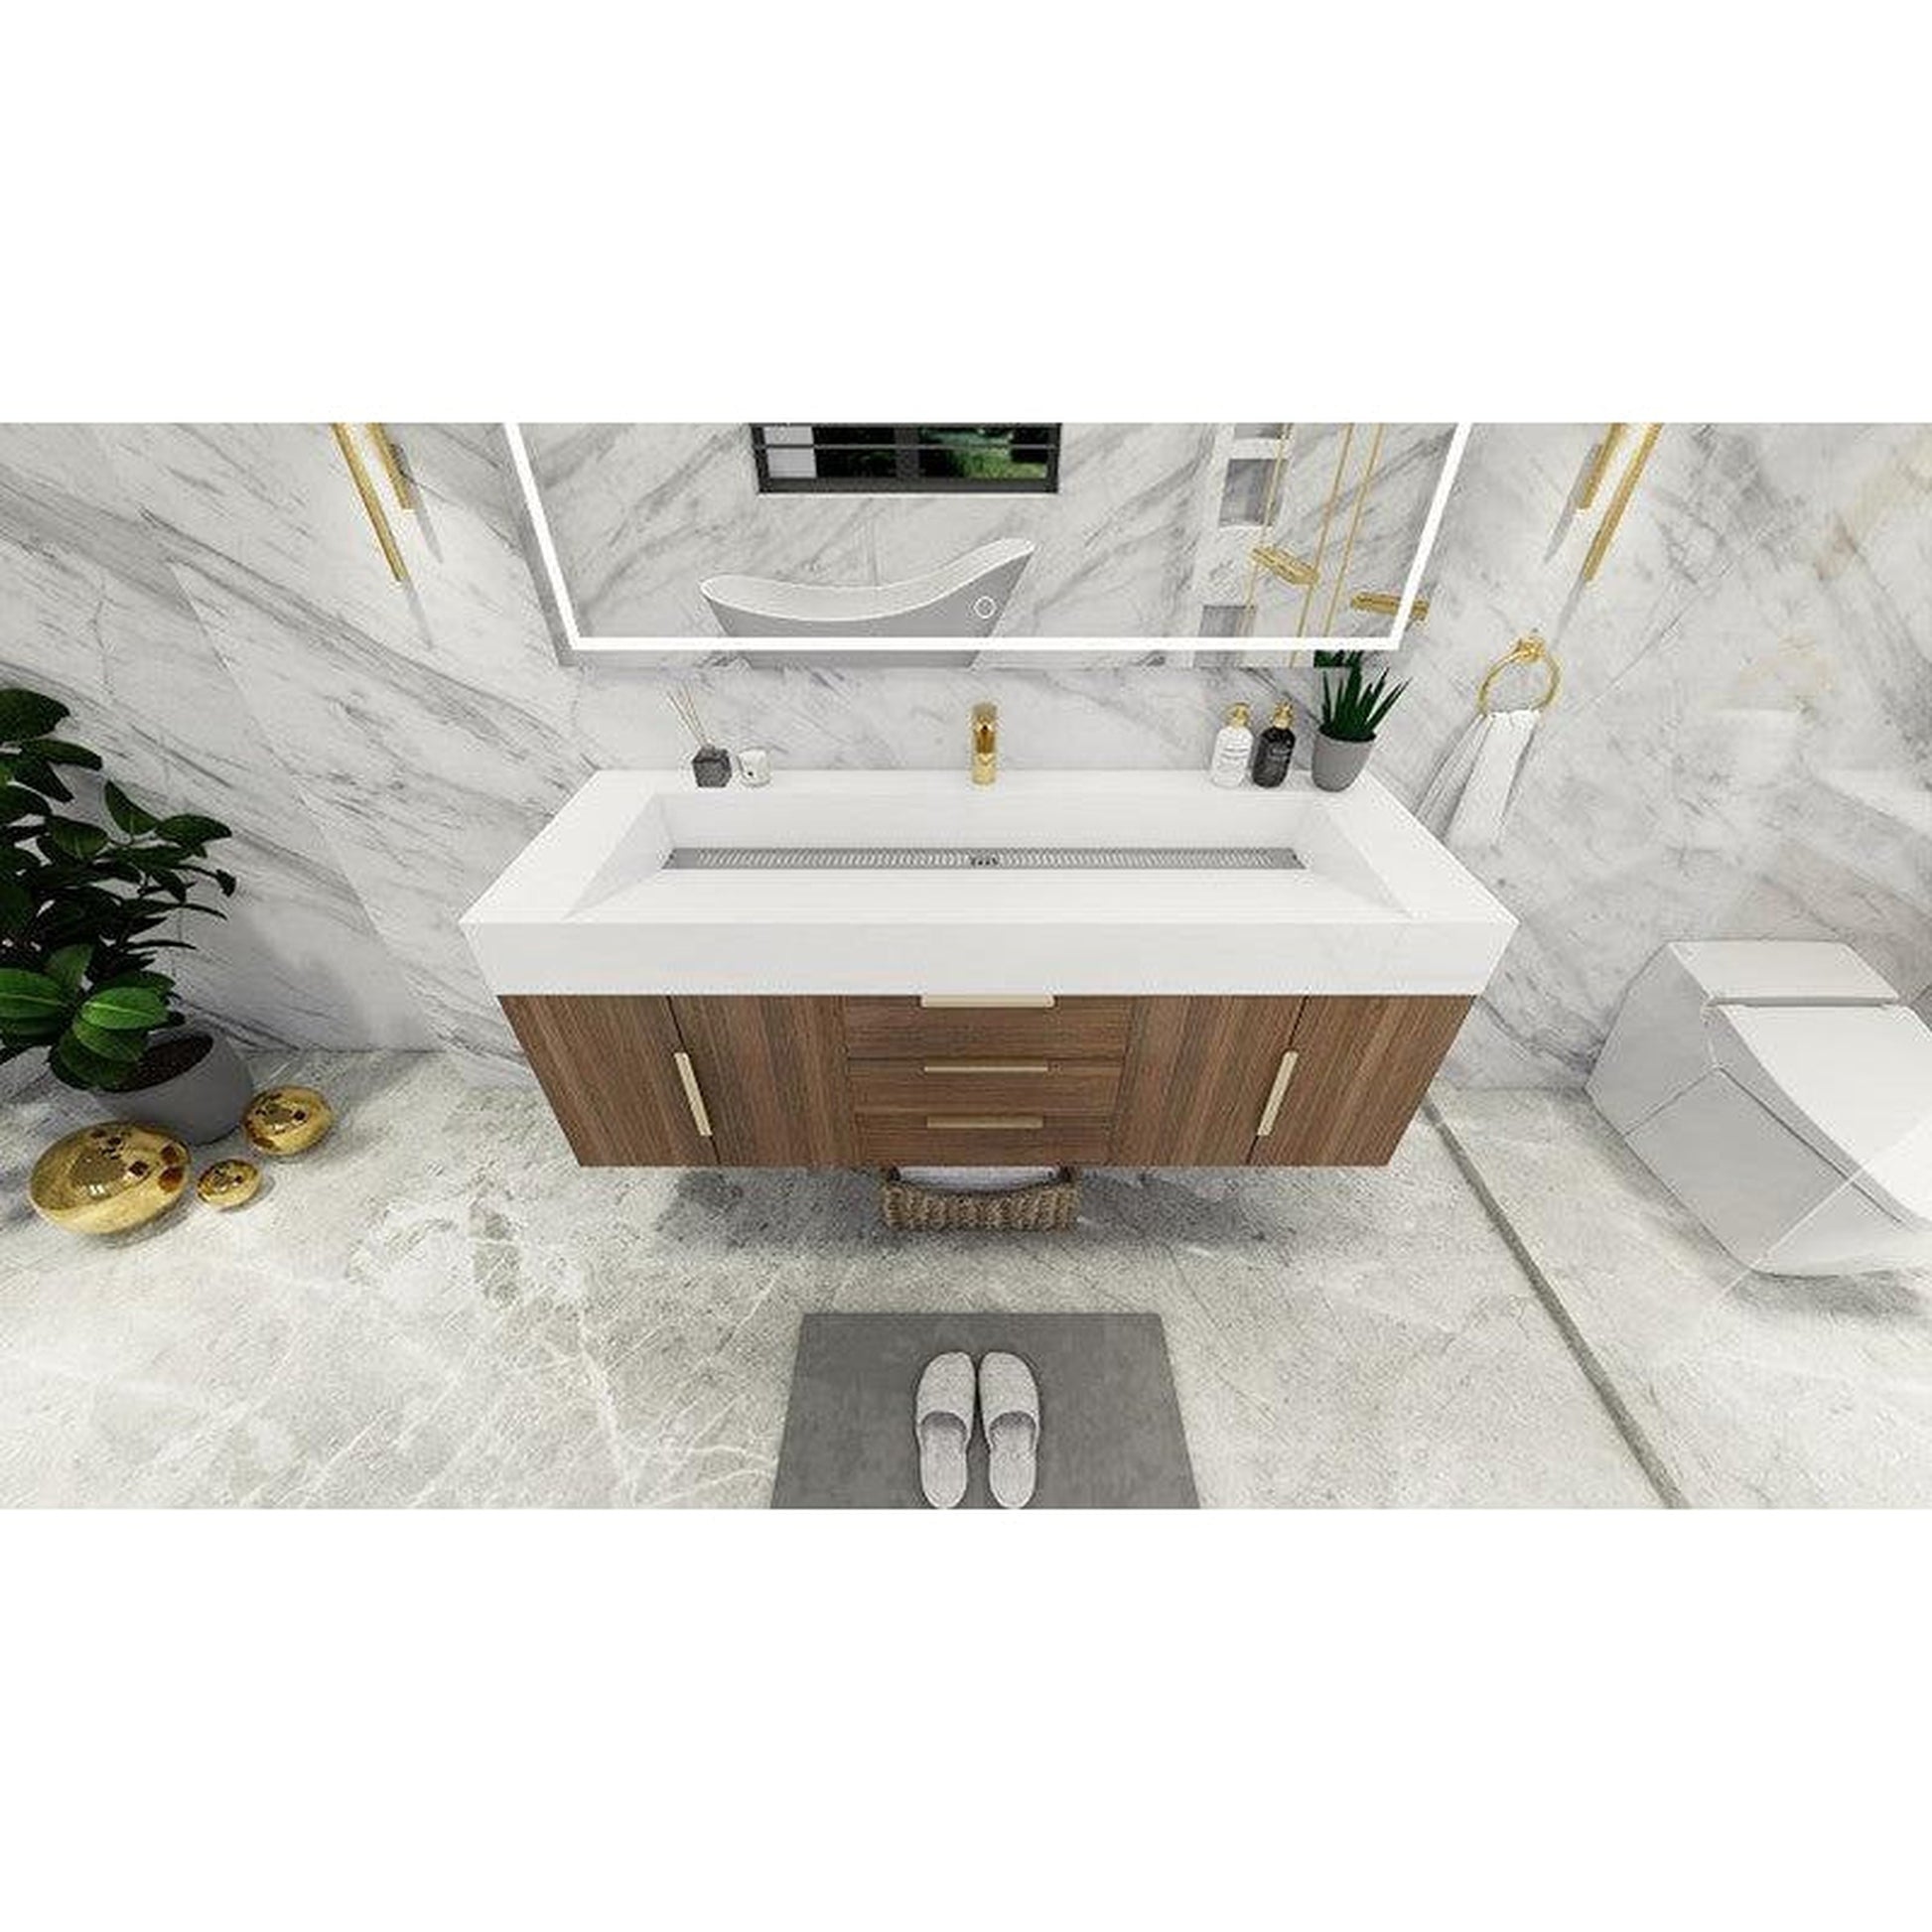 Moreno Bath Bethany 60" Rosewood Wall-Mounted Vanity With Single Reinforced White Acrylic Sink